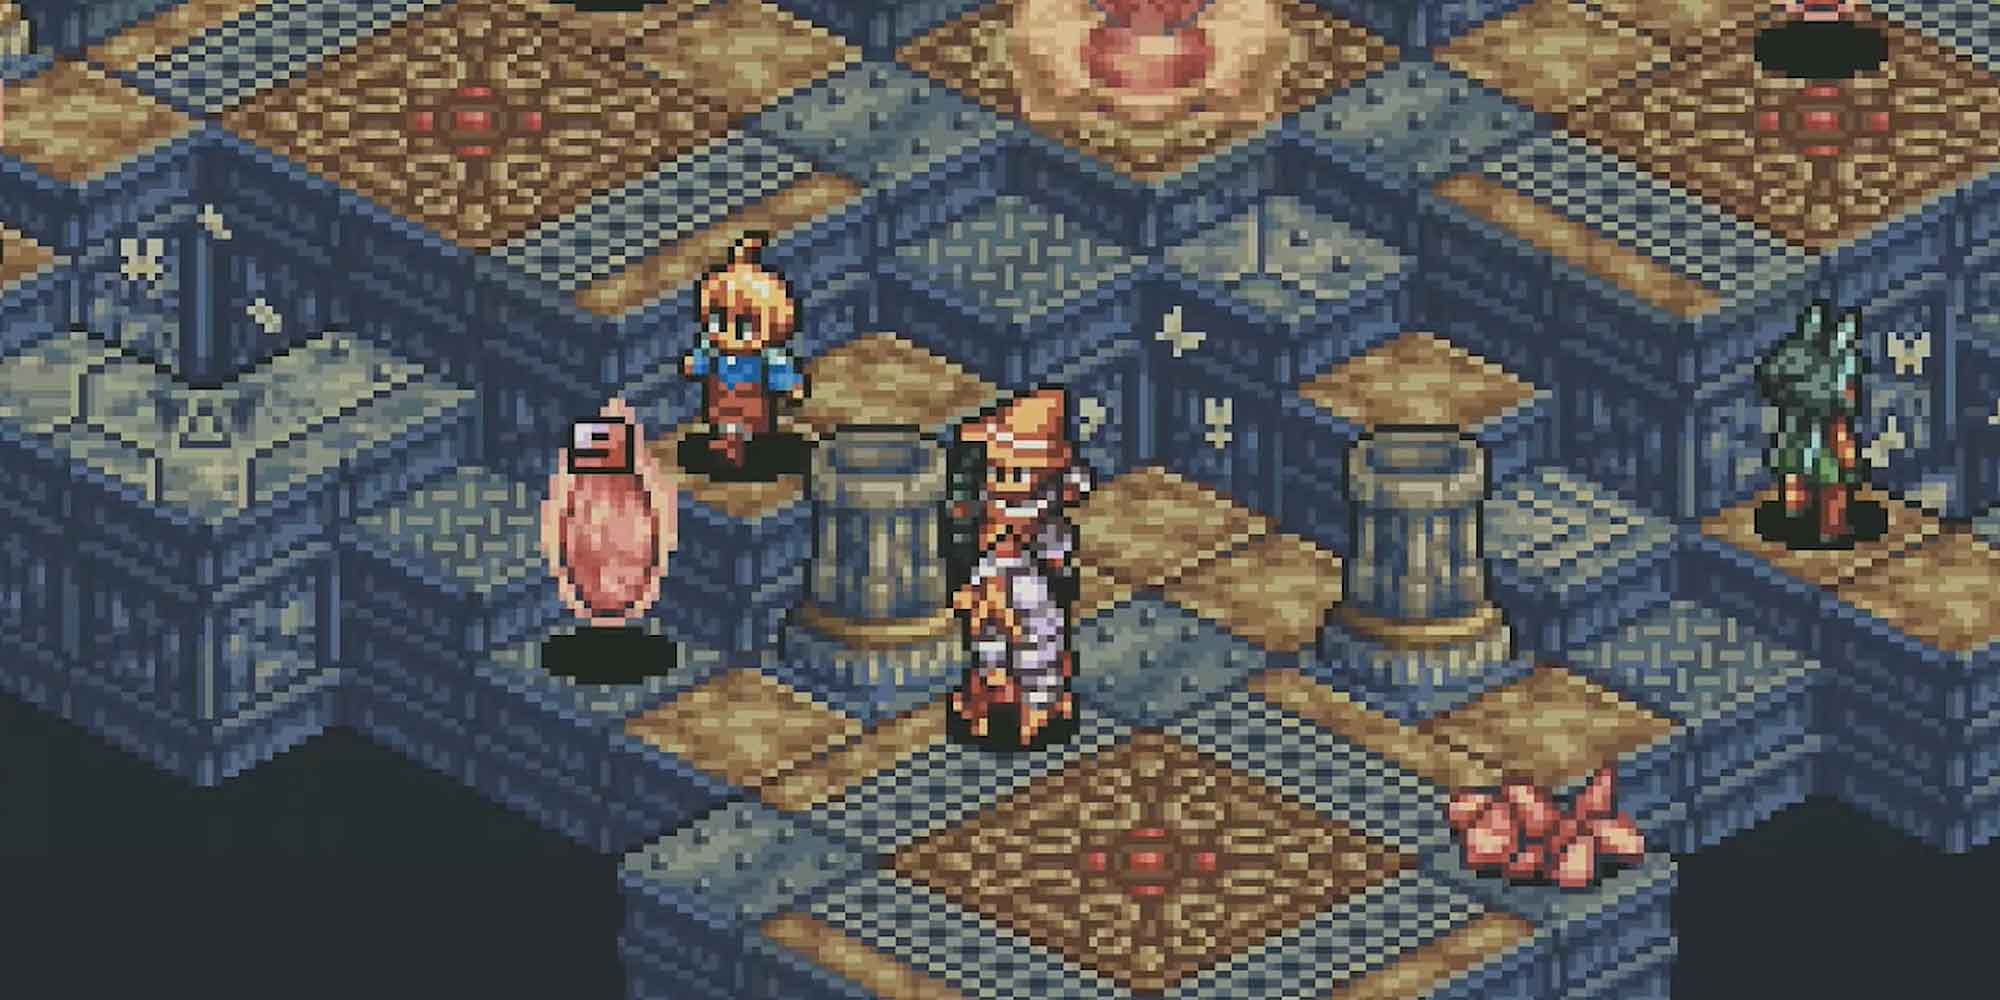 A view of the battlefield in Final Fantasy Tactics Advance